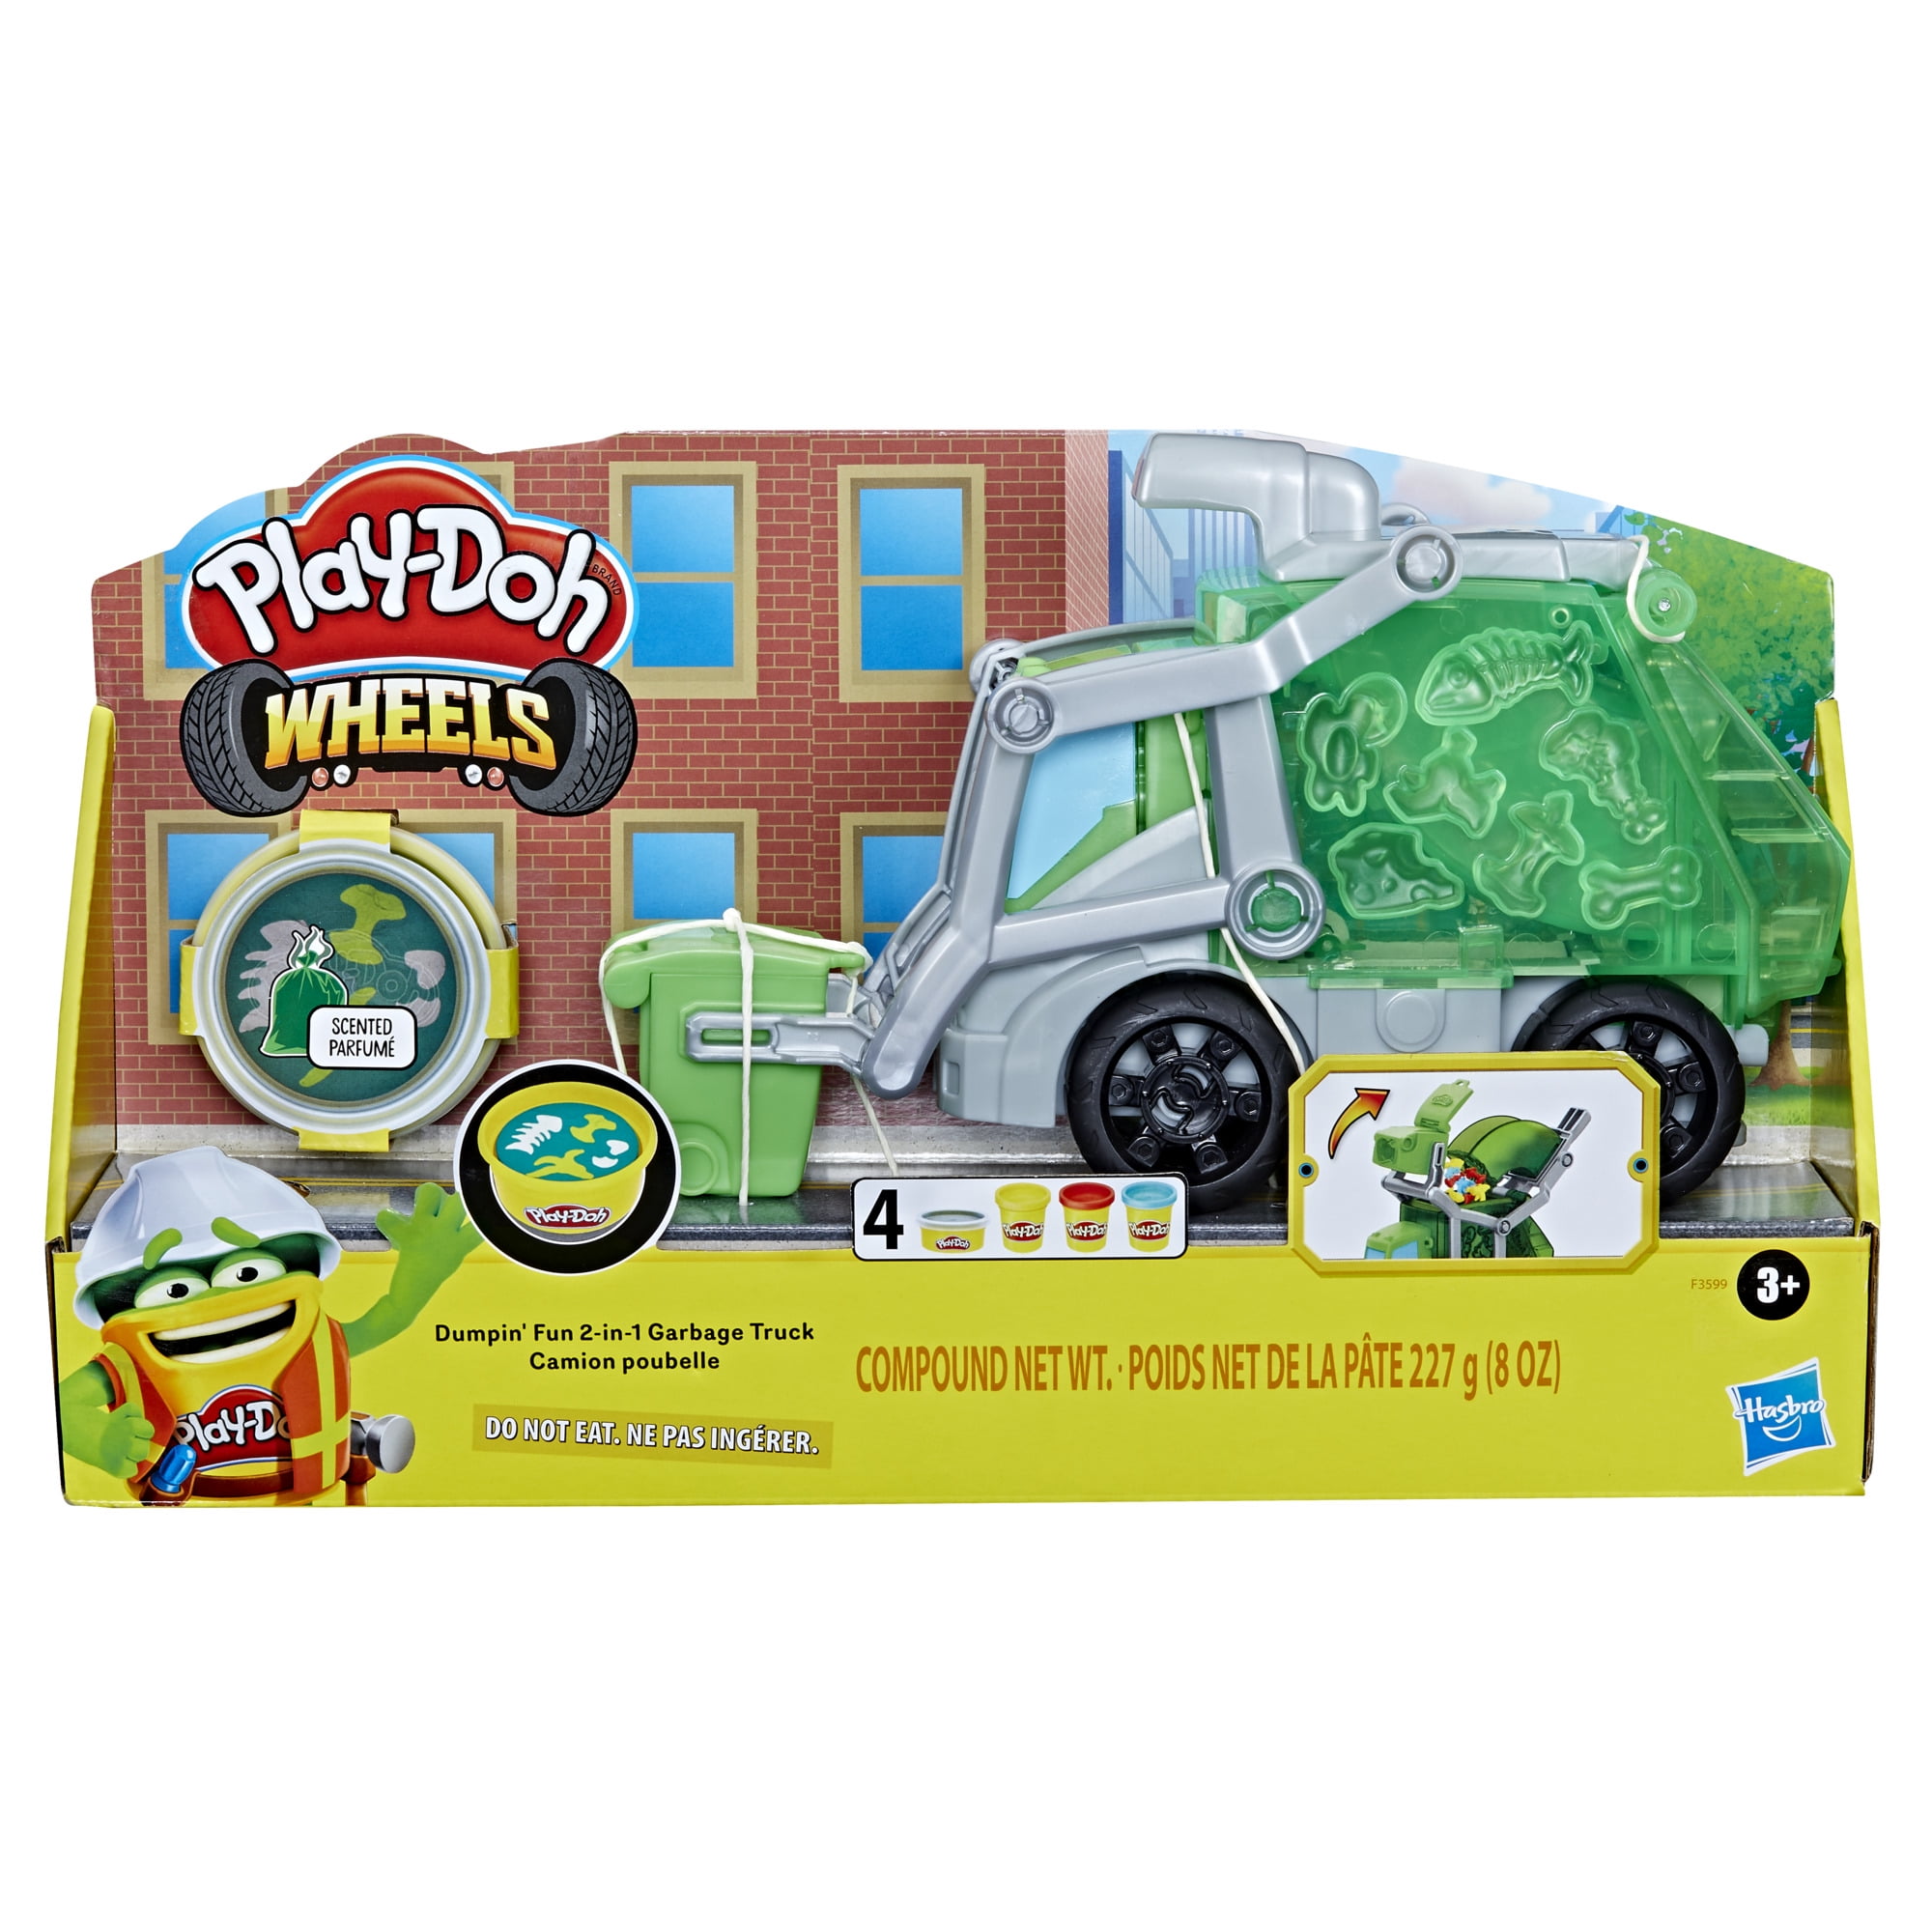 Play-Doh Wheels Dumpin' Fun 2-in-1 Garbage Truck with Garbage Compound and 3 Cans